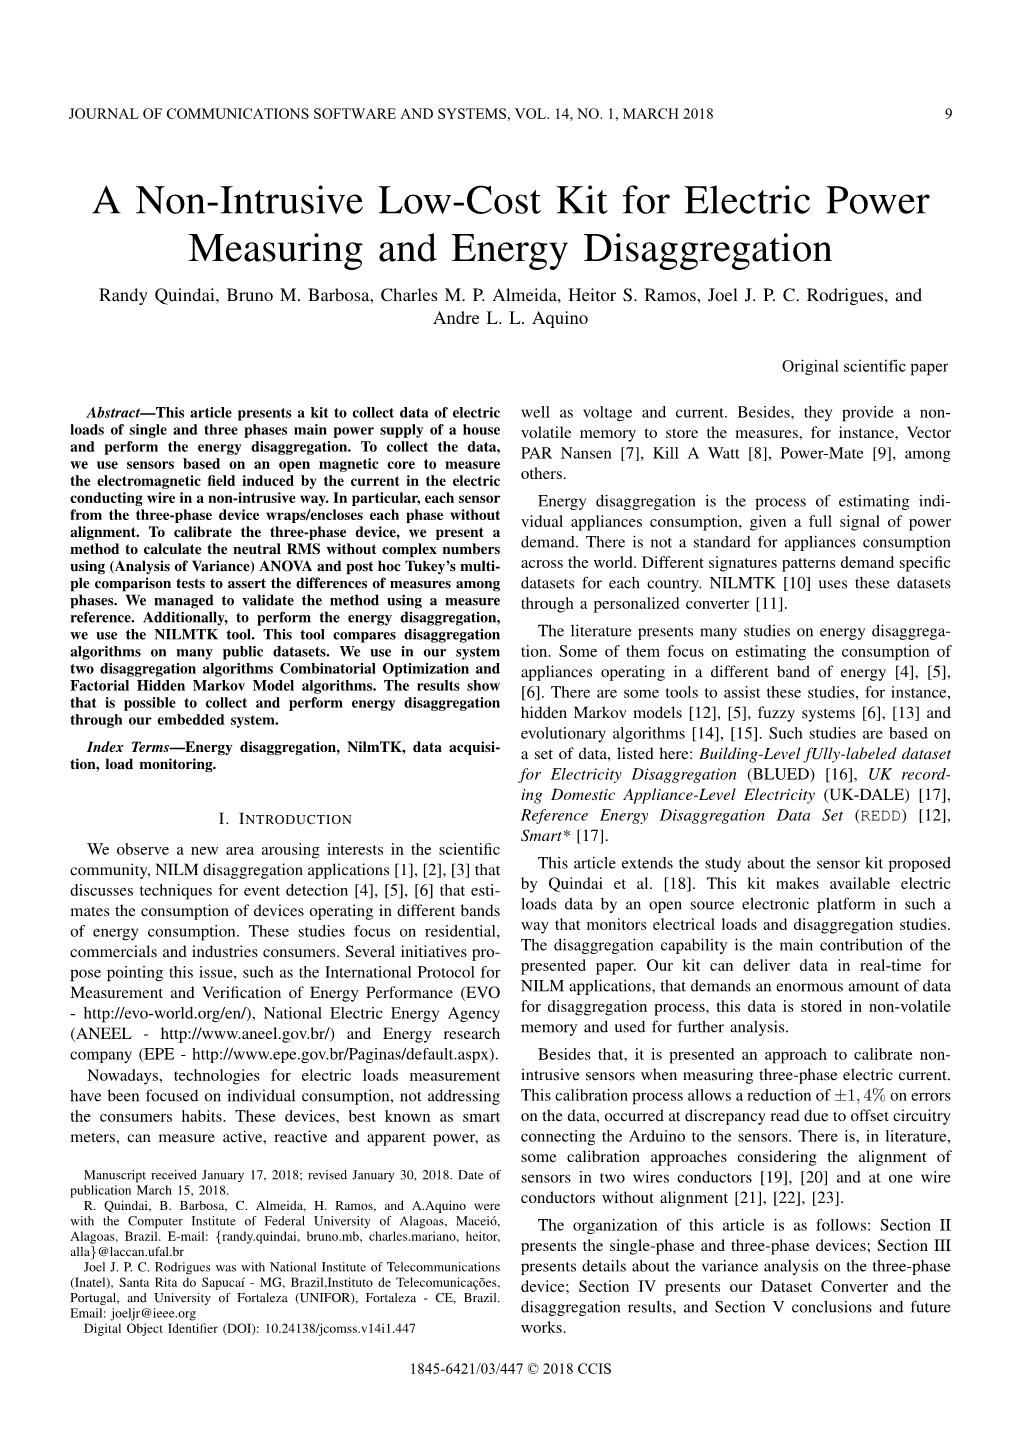 A Non-Intrusive Low-Cost Kit for Electric Power Measuring and Energy Disaggregation Randy Quindai, Bruno M